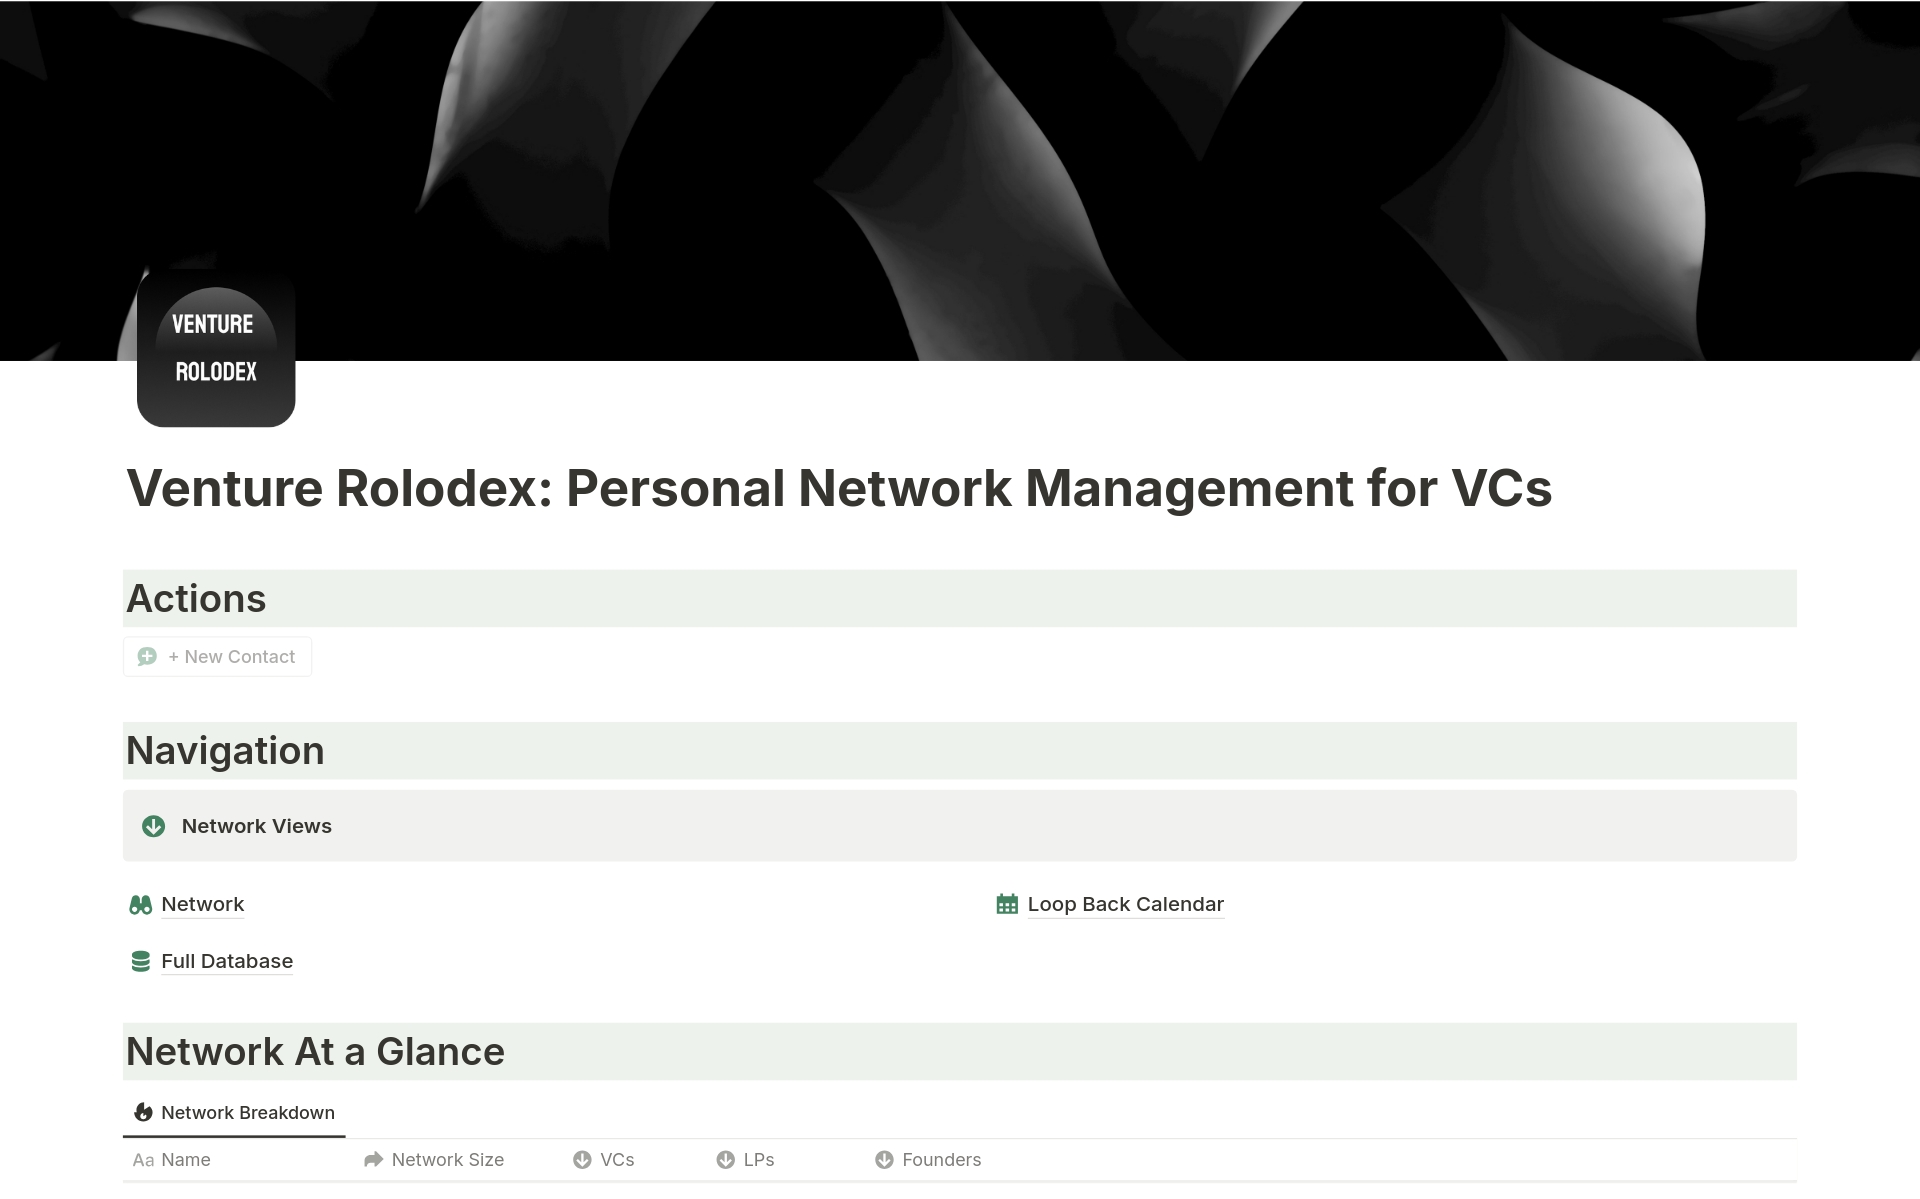 VentureScope revolutionizes VC networking by streamlining contact management of peers, LPs, & founders. Features include advanced segmentation, easy contact addition, & interaction tracking, making it the ultimate tool for VCs to optimize their professional networks efficiently.
